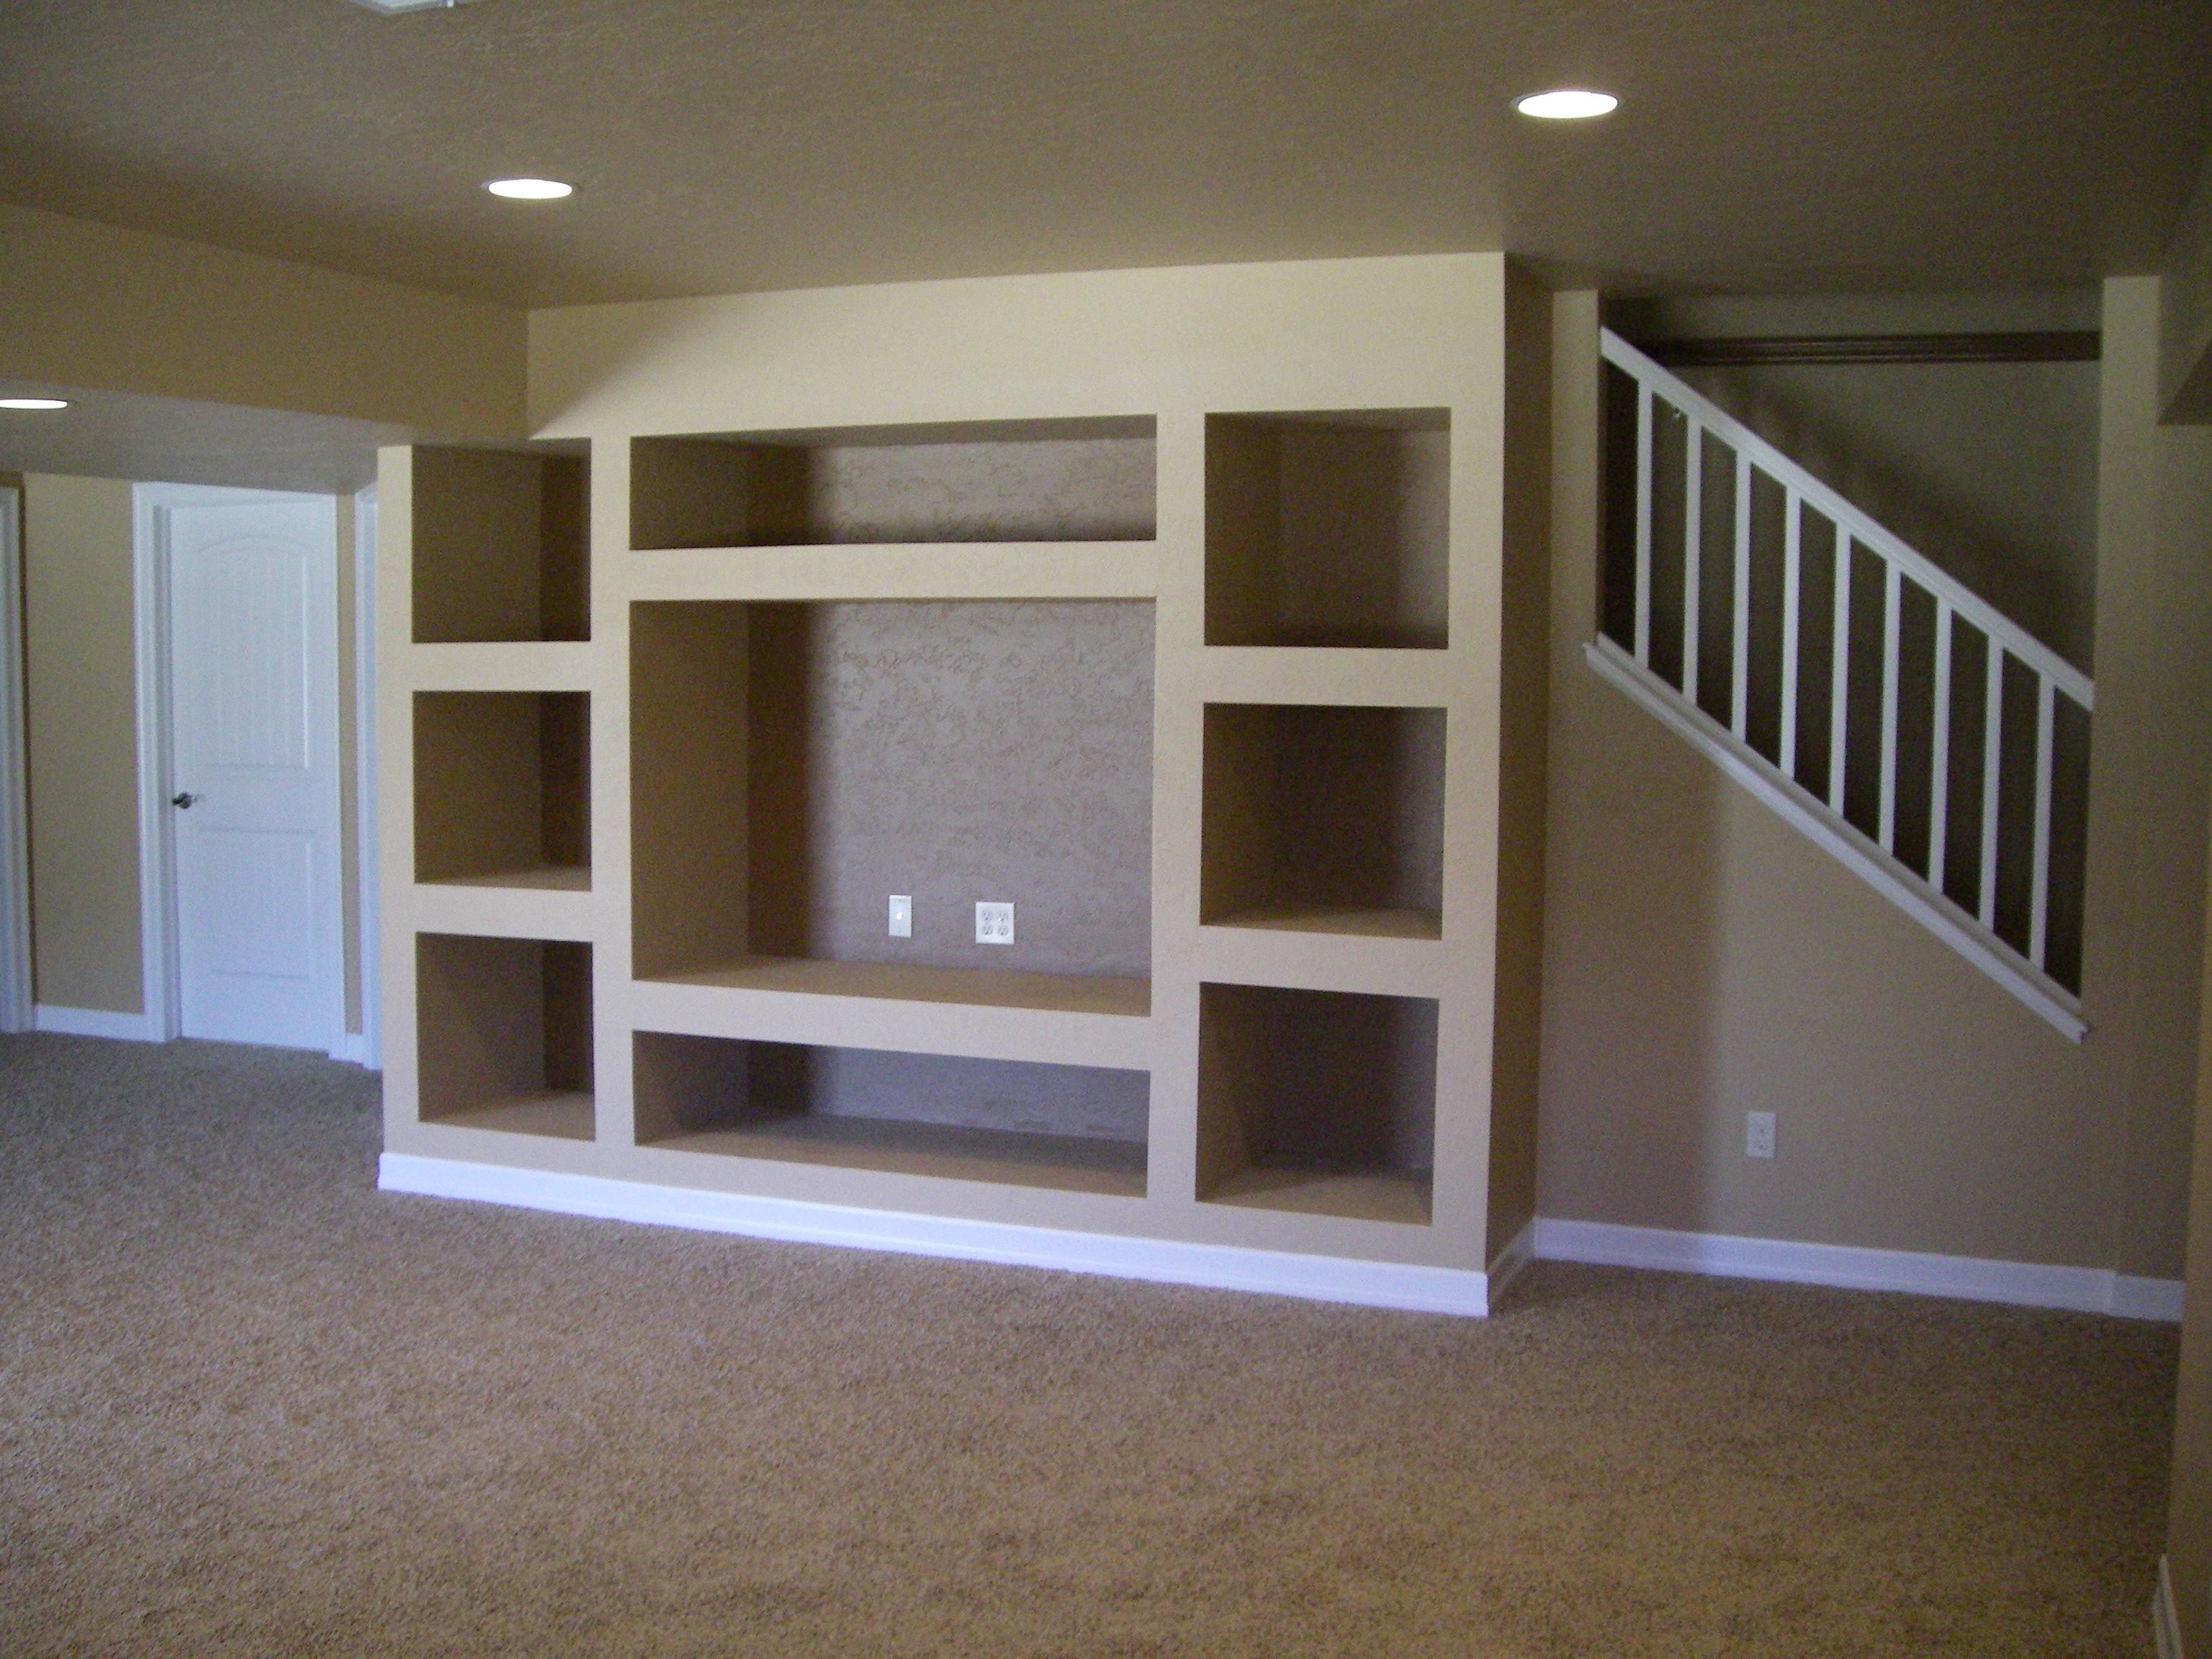 Floating Entertainment Center with Fireplace New Built In Entertainment Center Google Search